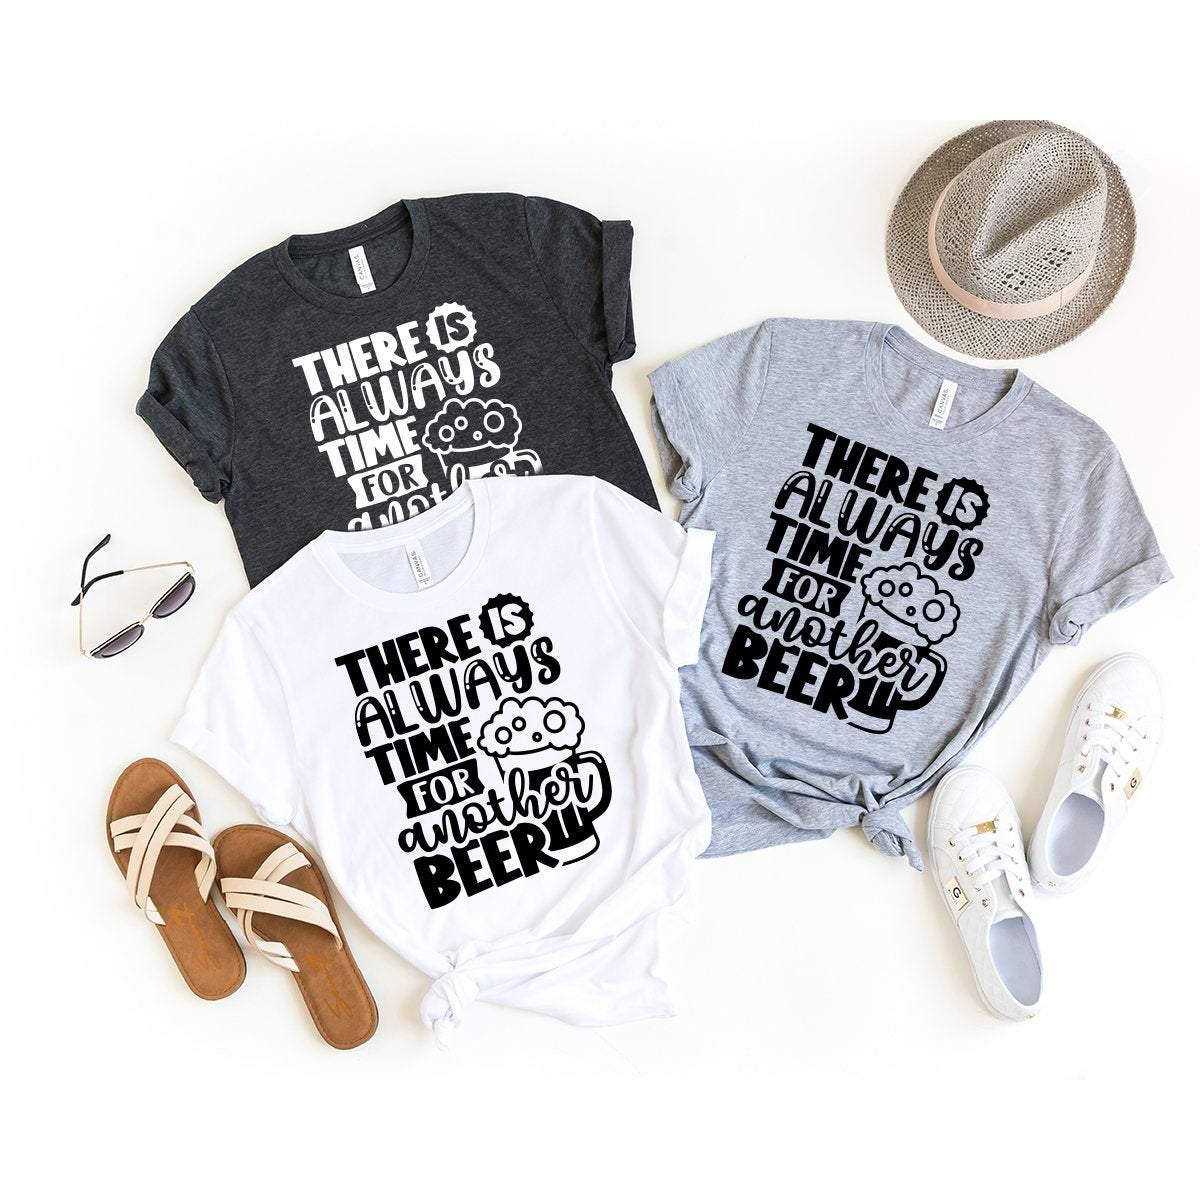 Funny Beer T-Shirt, Gift For Beer Lover, Alcoholic Shirt, Alcohol Shirt, Beer Tshirt, There Is Always Time For Another Beer  Shirt - Fastdeliverytees.com